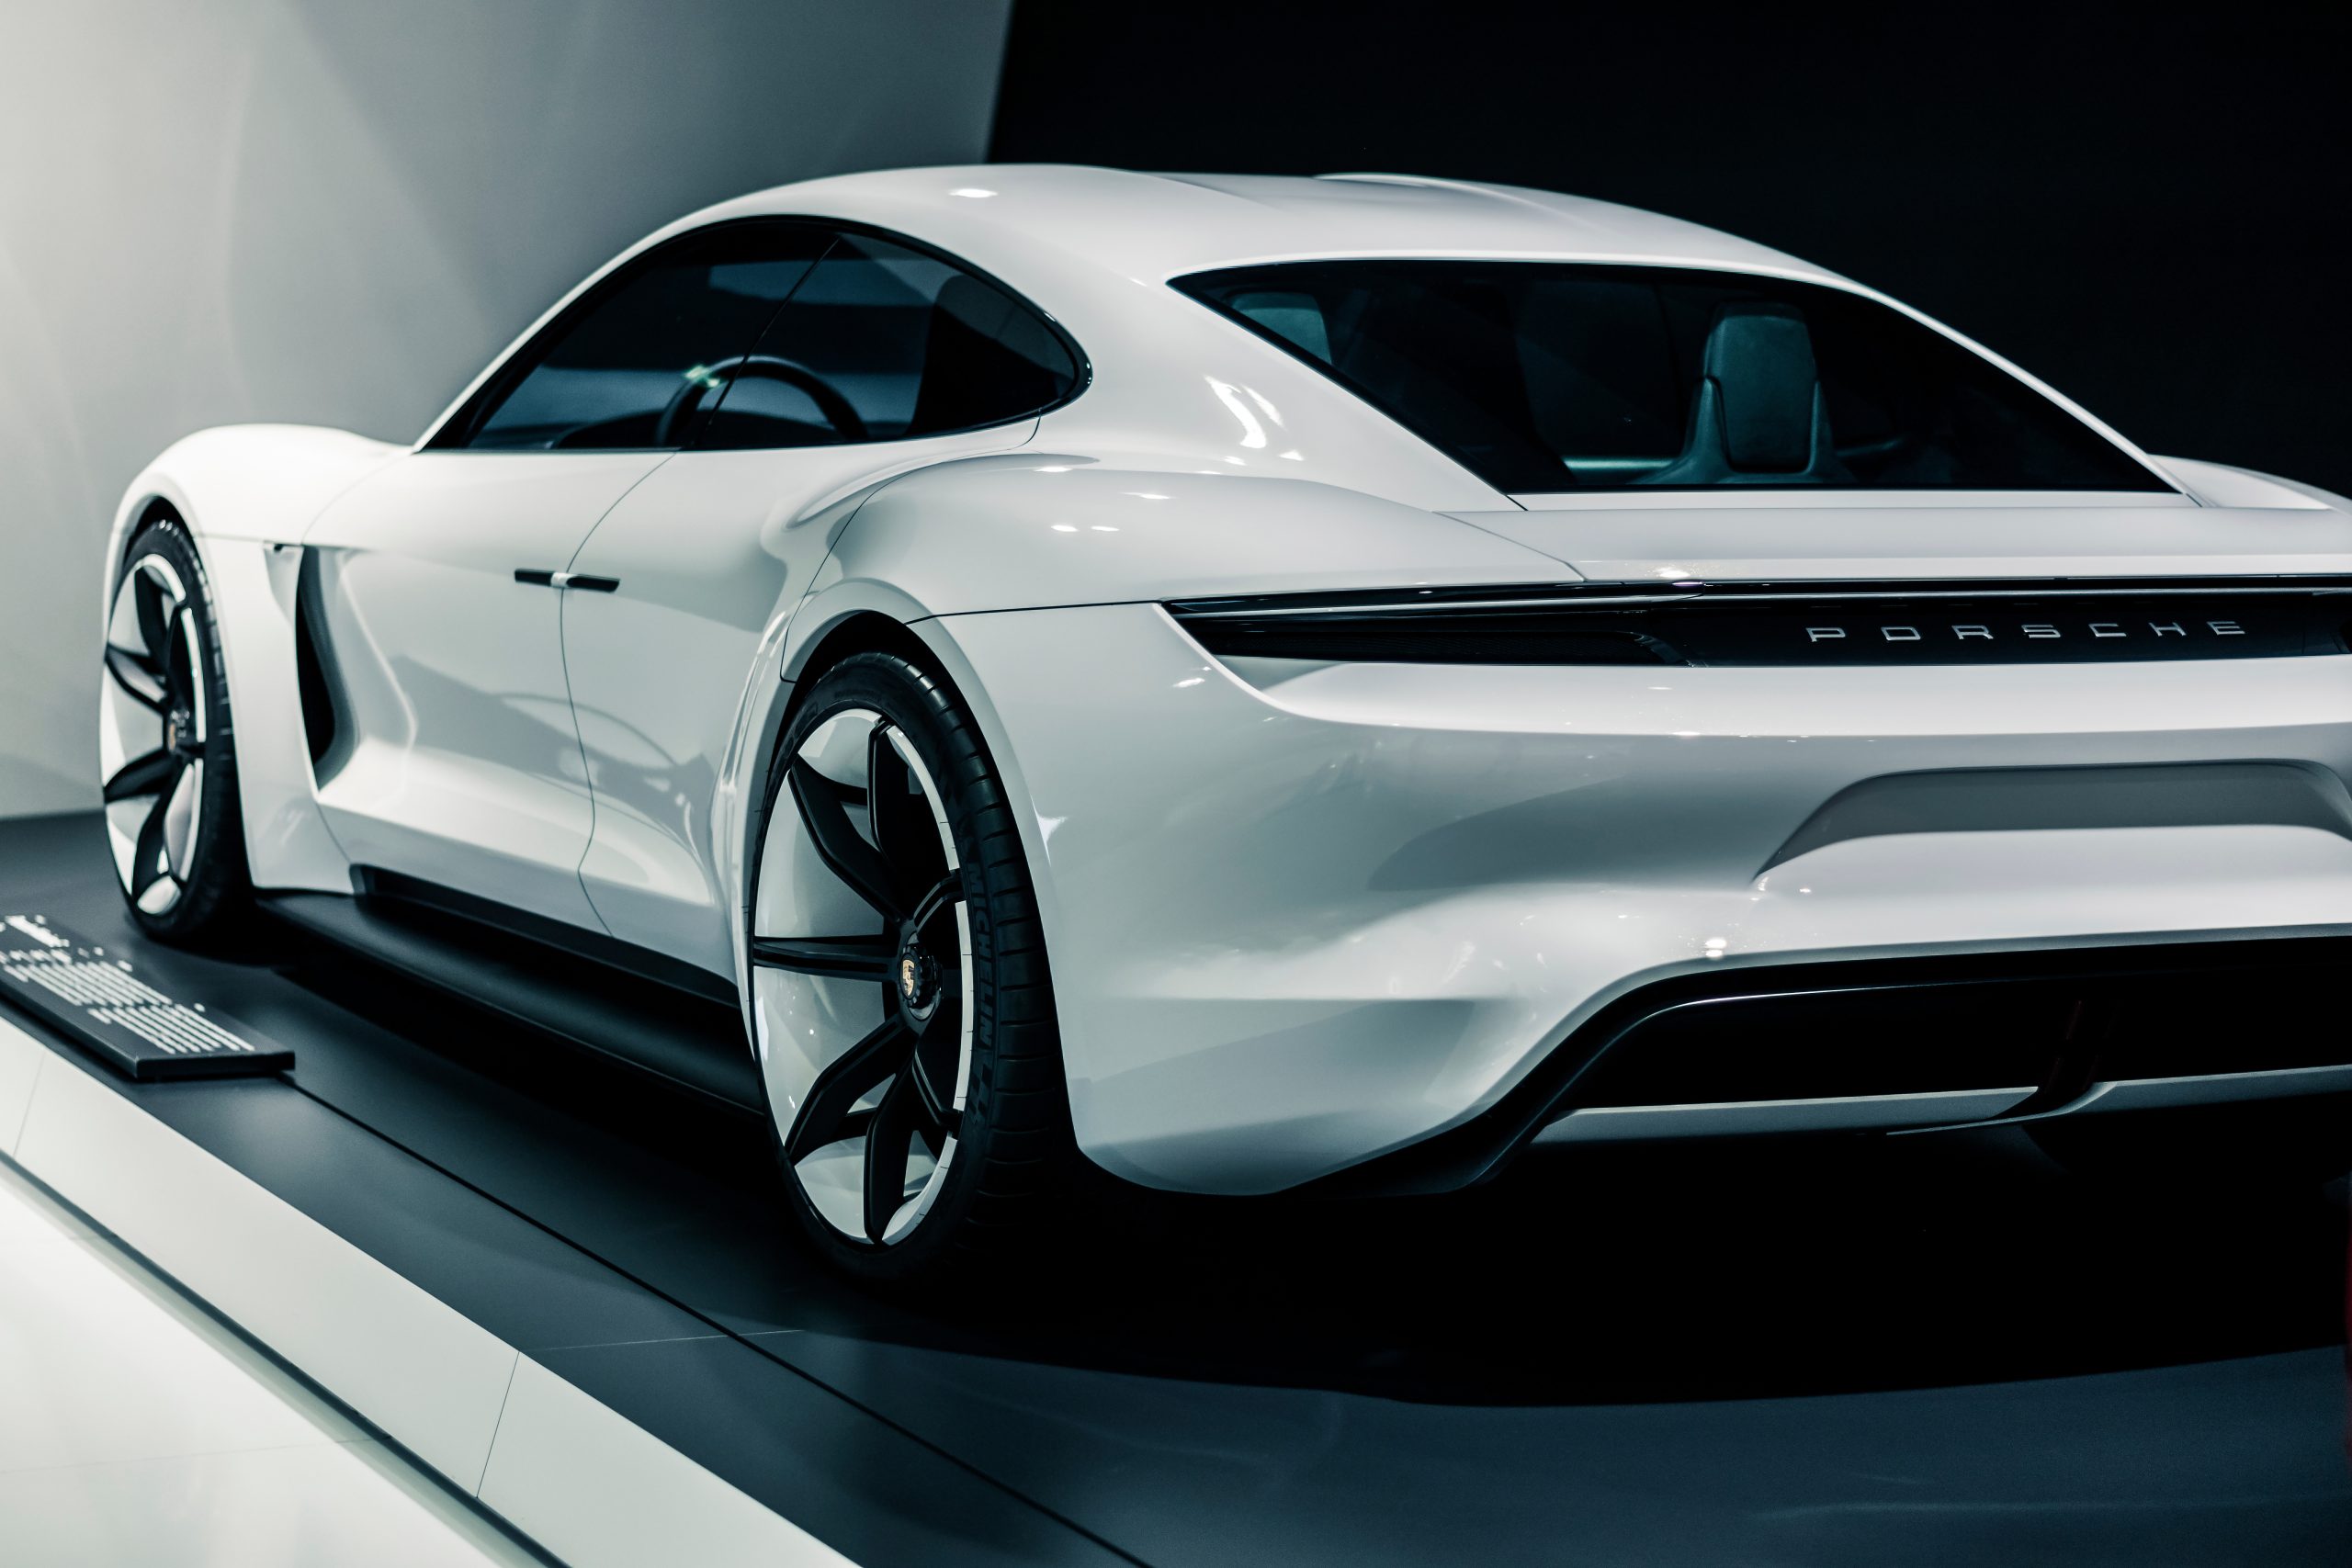 According to a new class action lawsuit, Porsche Cars North America, Inc., has allegedly advertised and sold defective 2020 and 2021 Taycan vehicles.